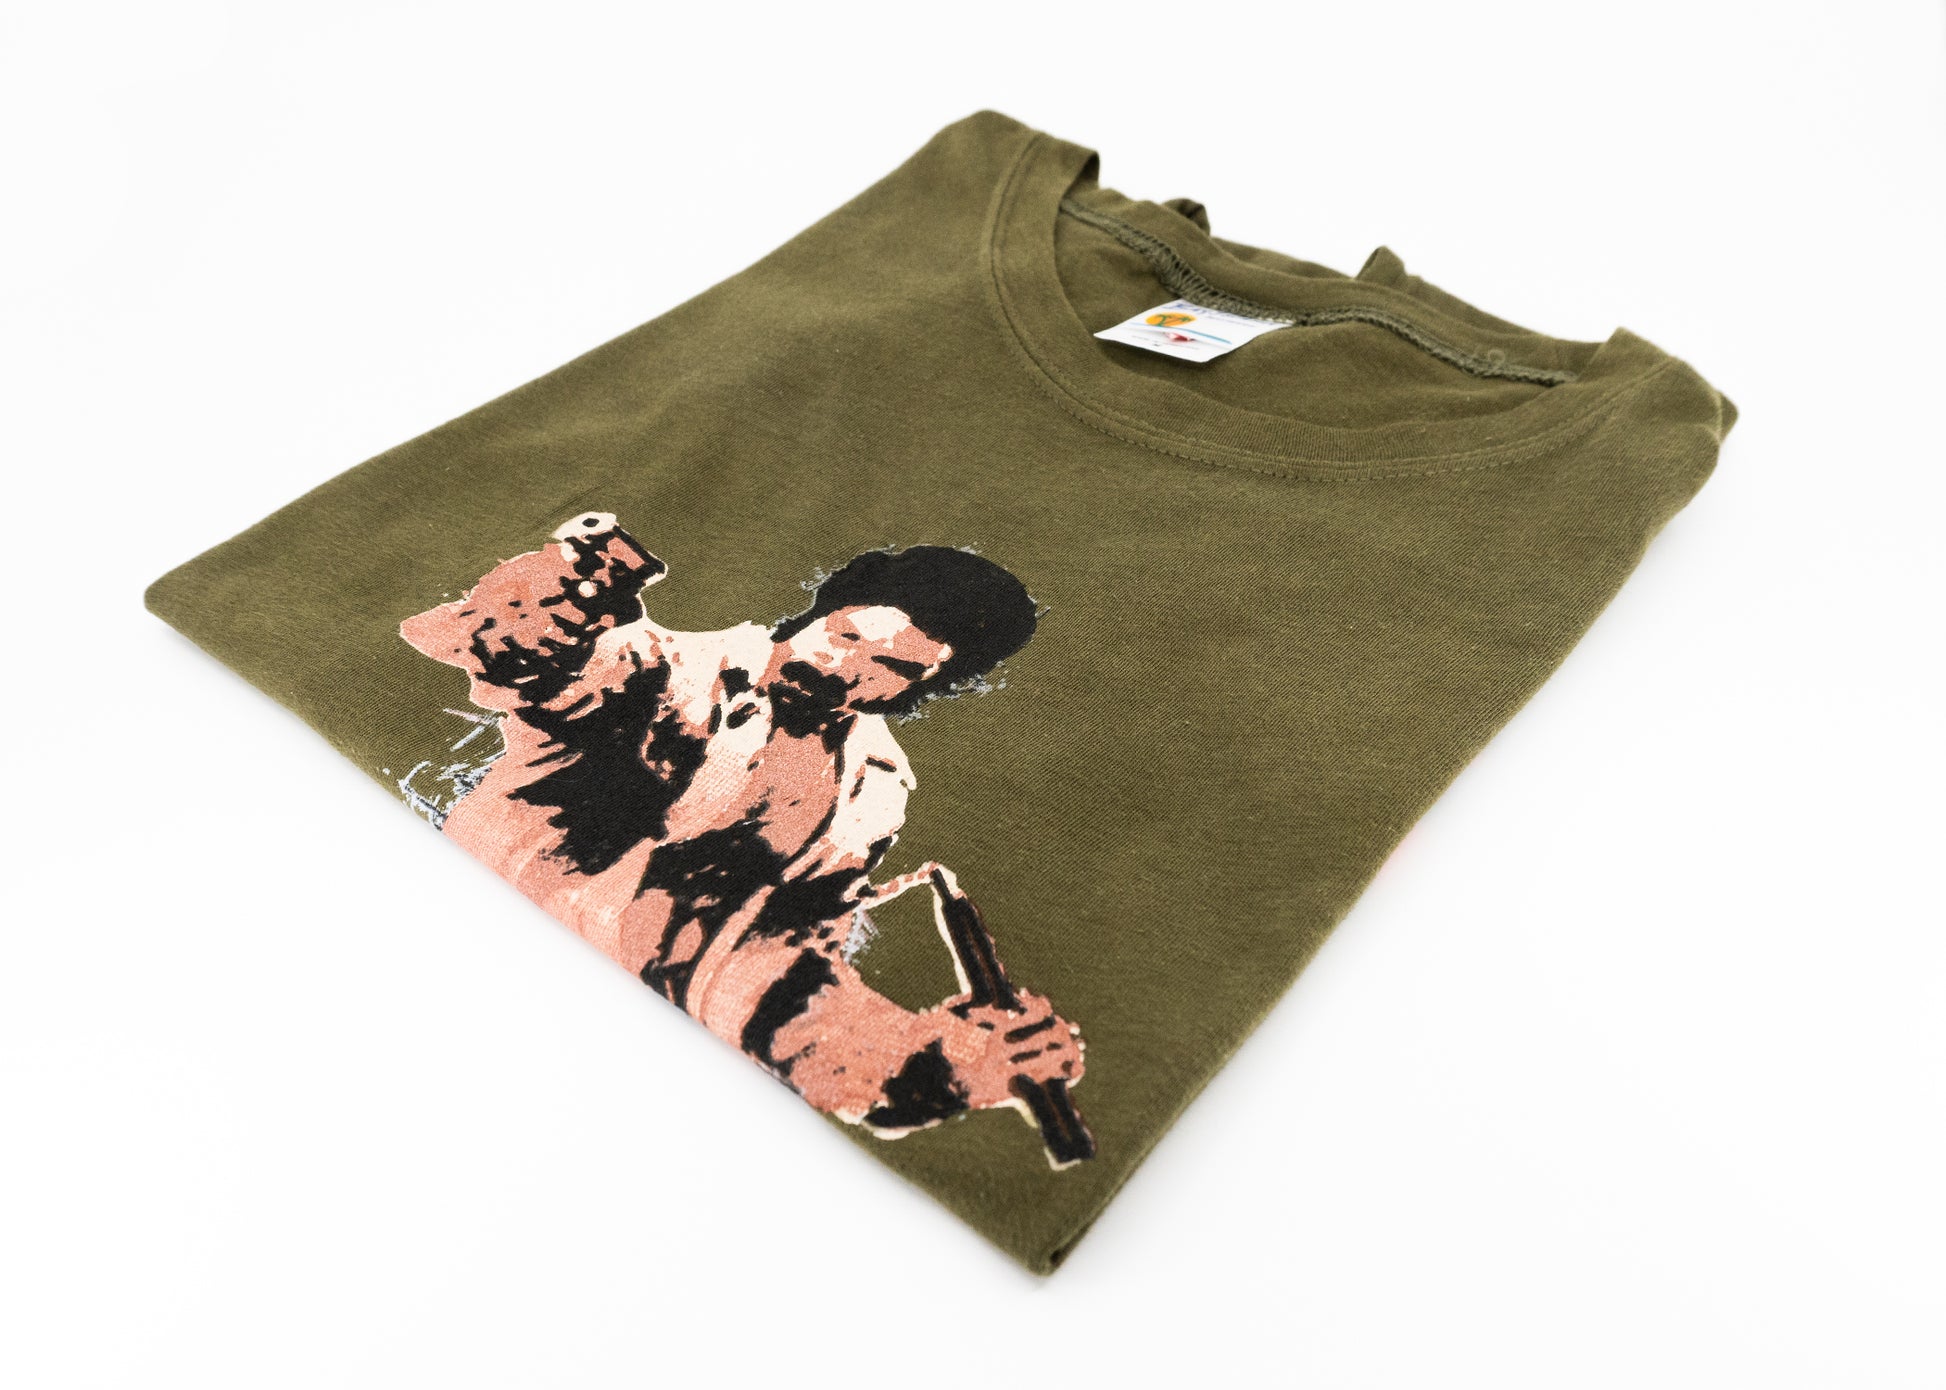 BLACK DYNAMITE! Green Graphic Tee by Titmouse Detail View